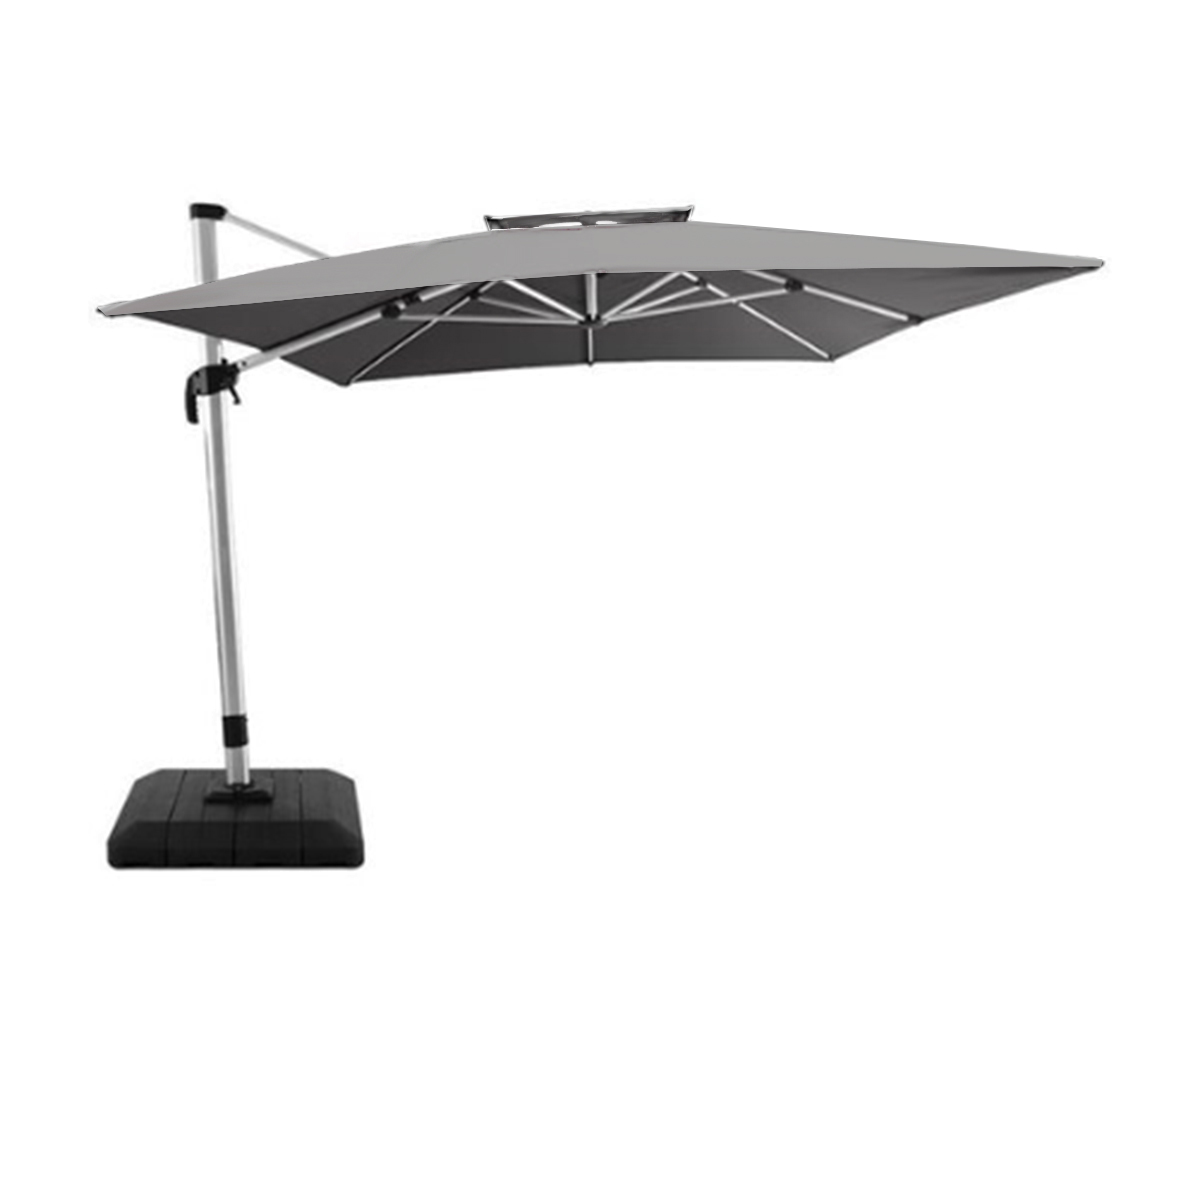 Replacement Canopy for Allen + Roth 10ft Umbrella-RipLock 350